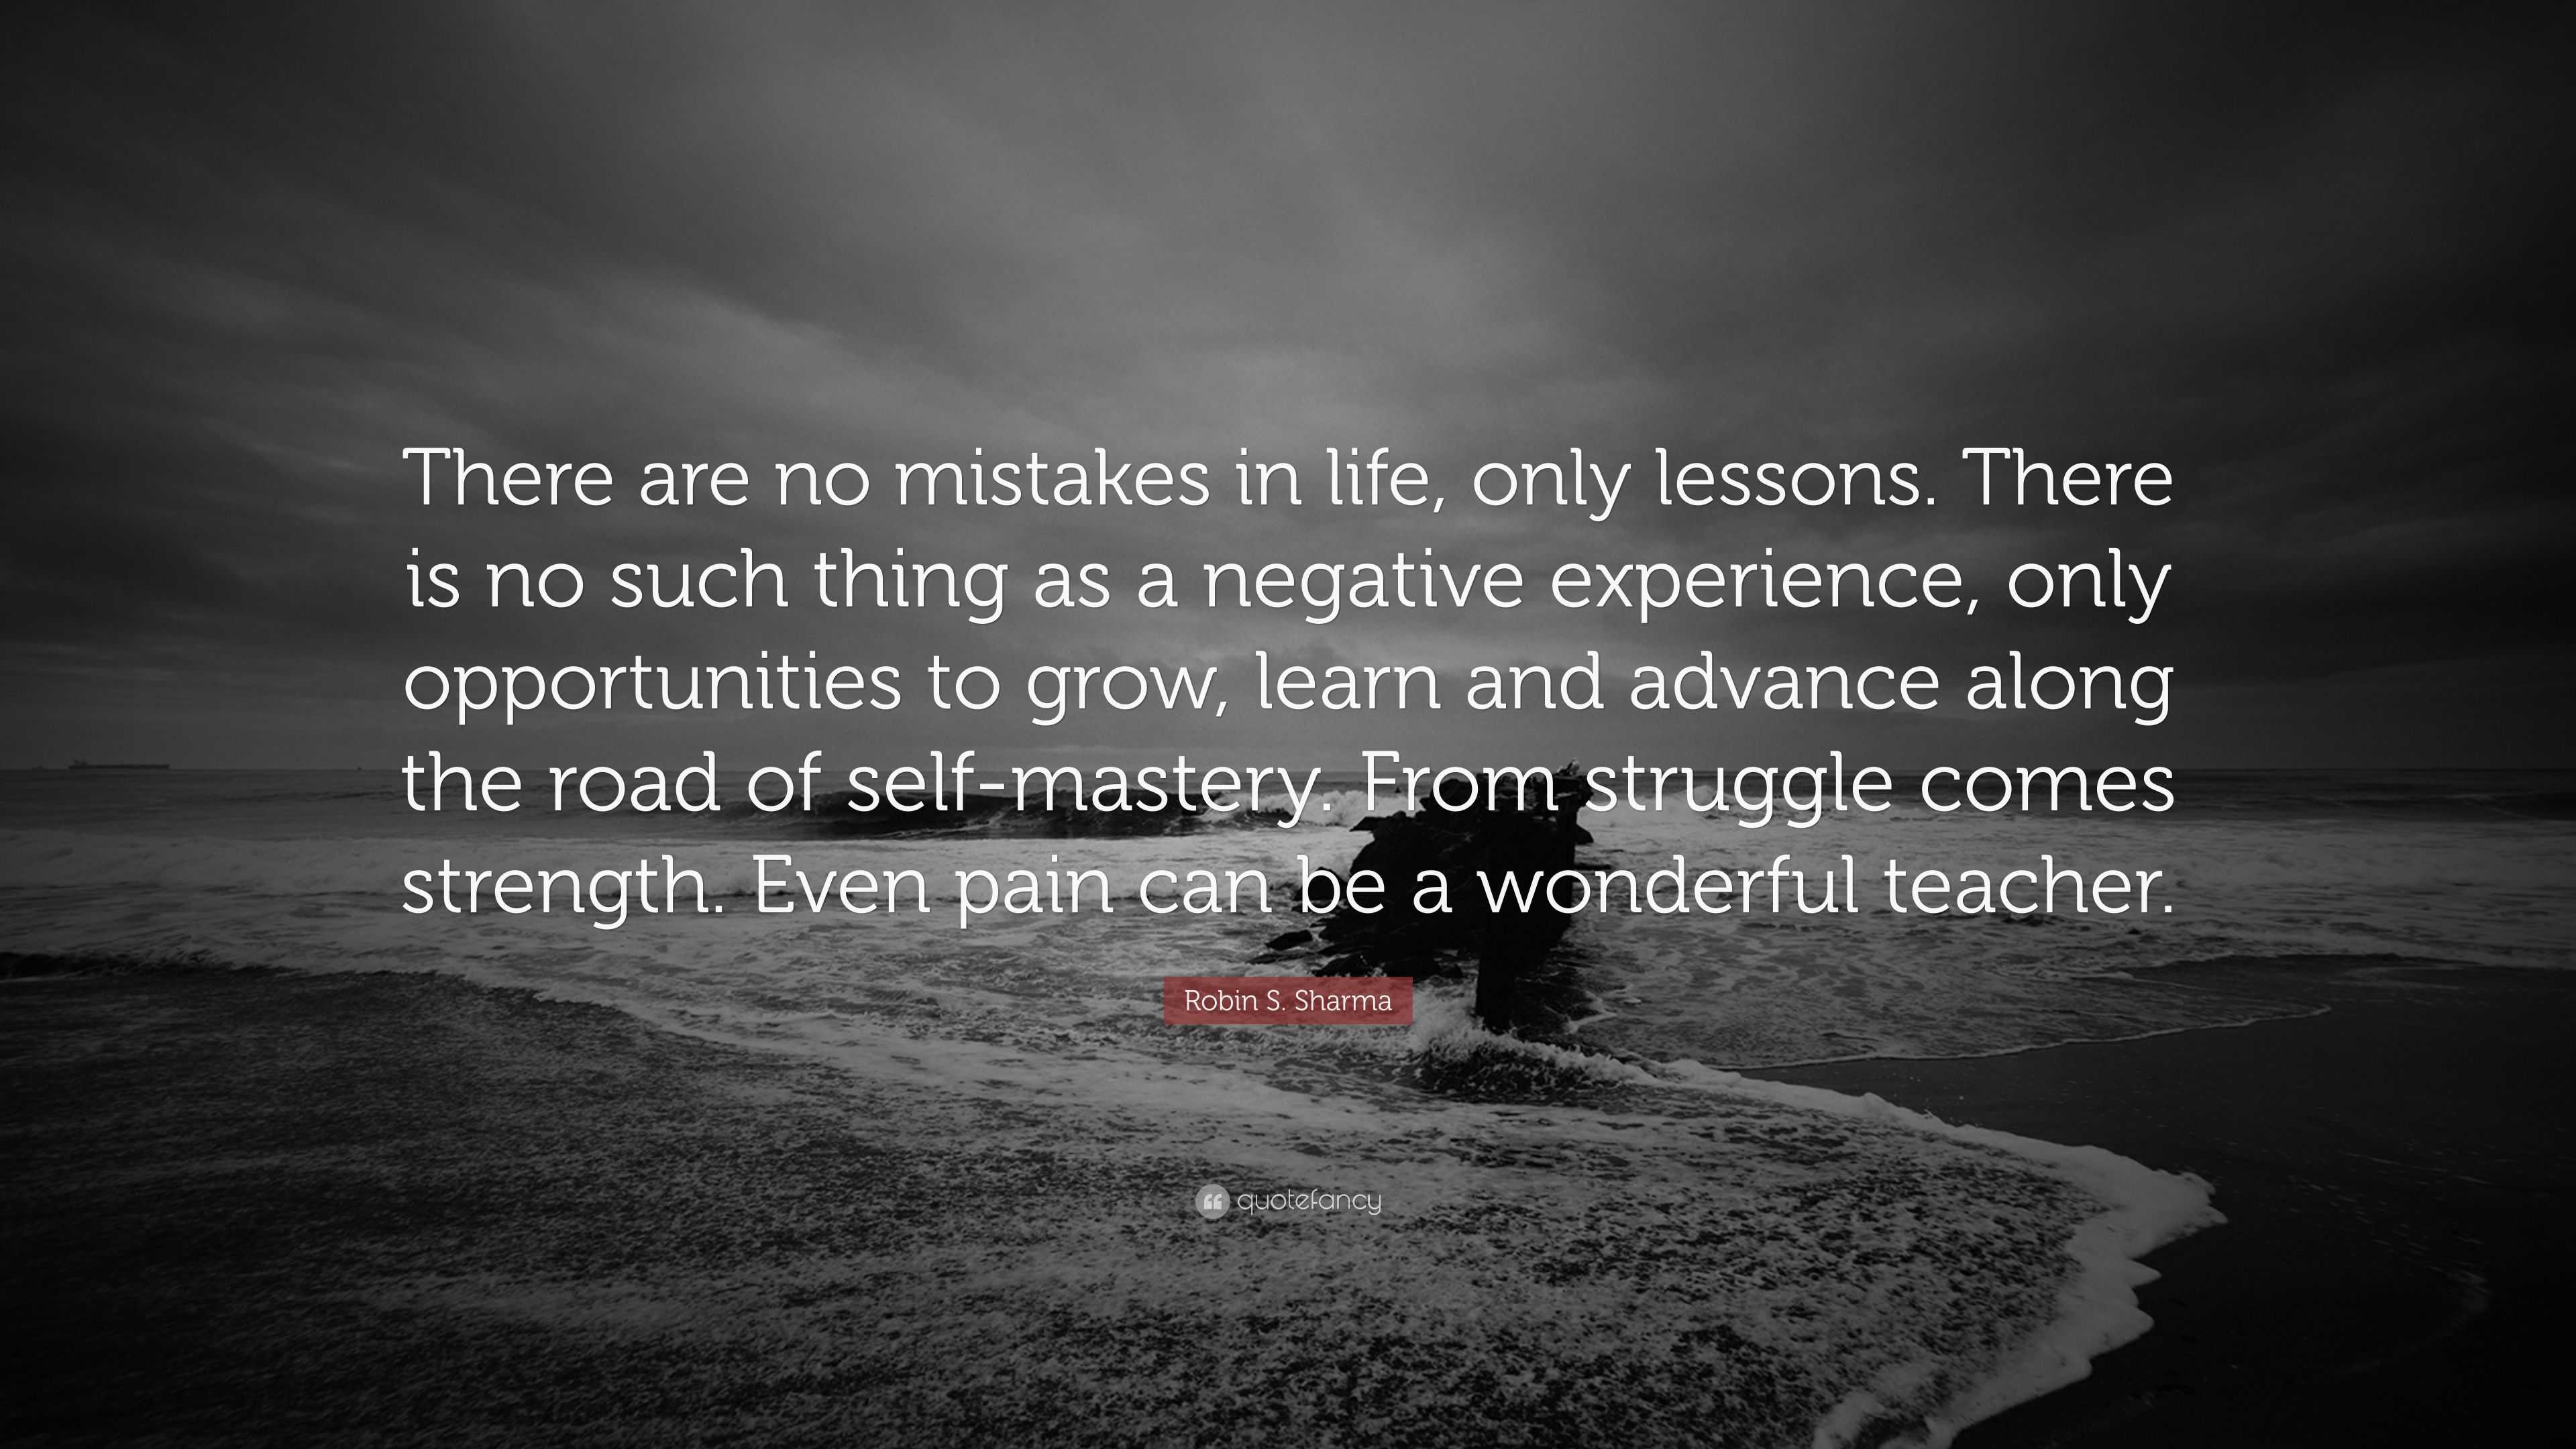 Robin S Sharma Quote  There are no mistakes  in life  